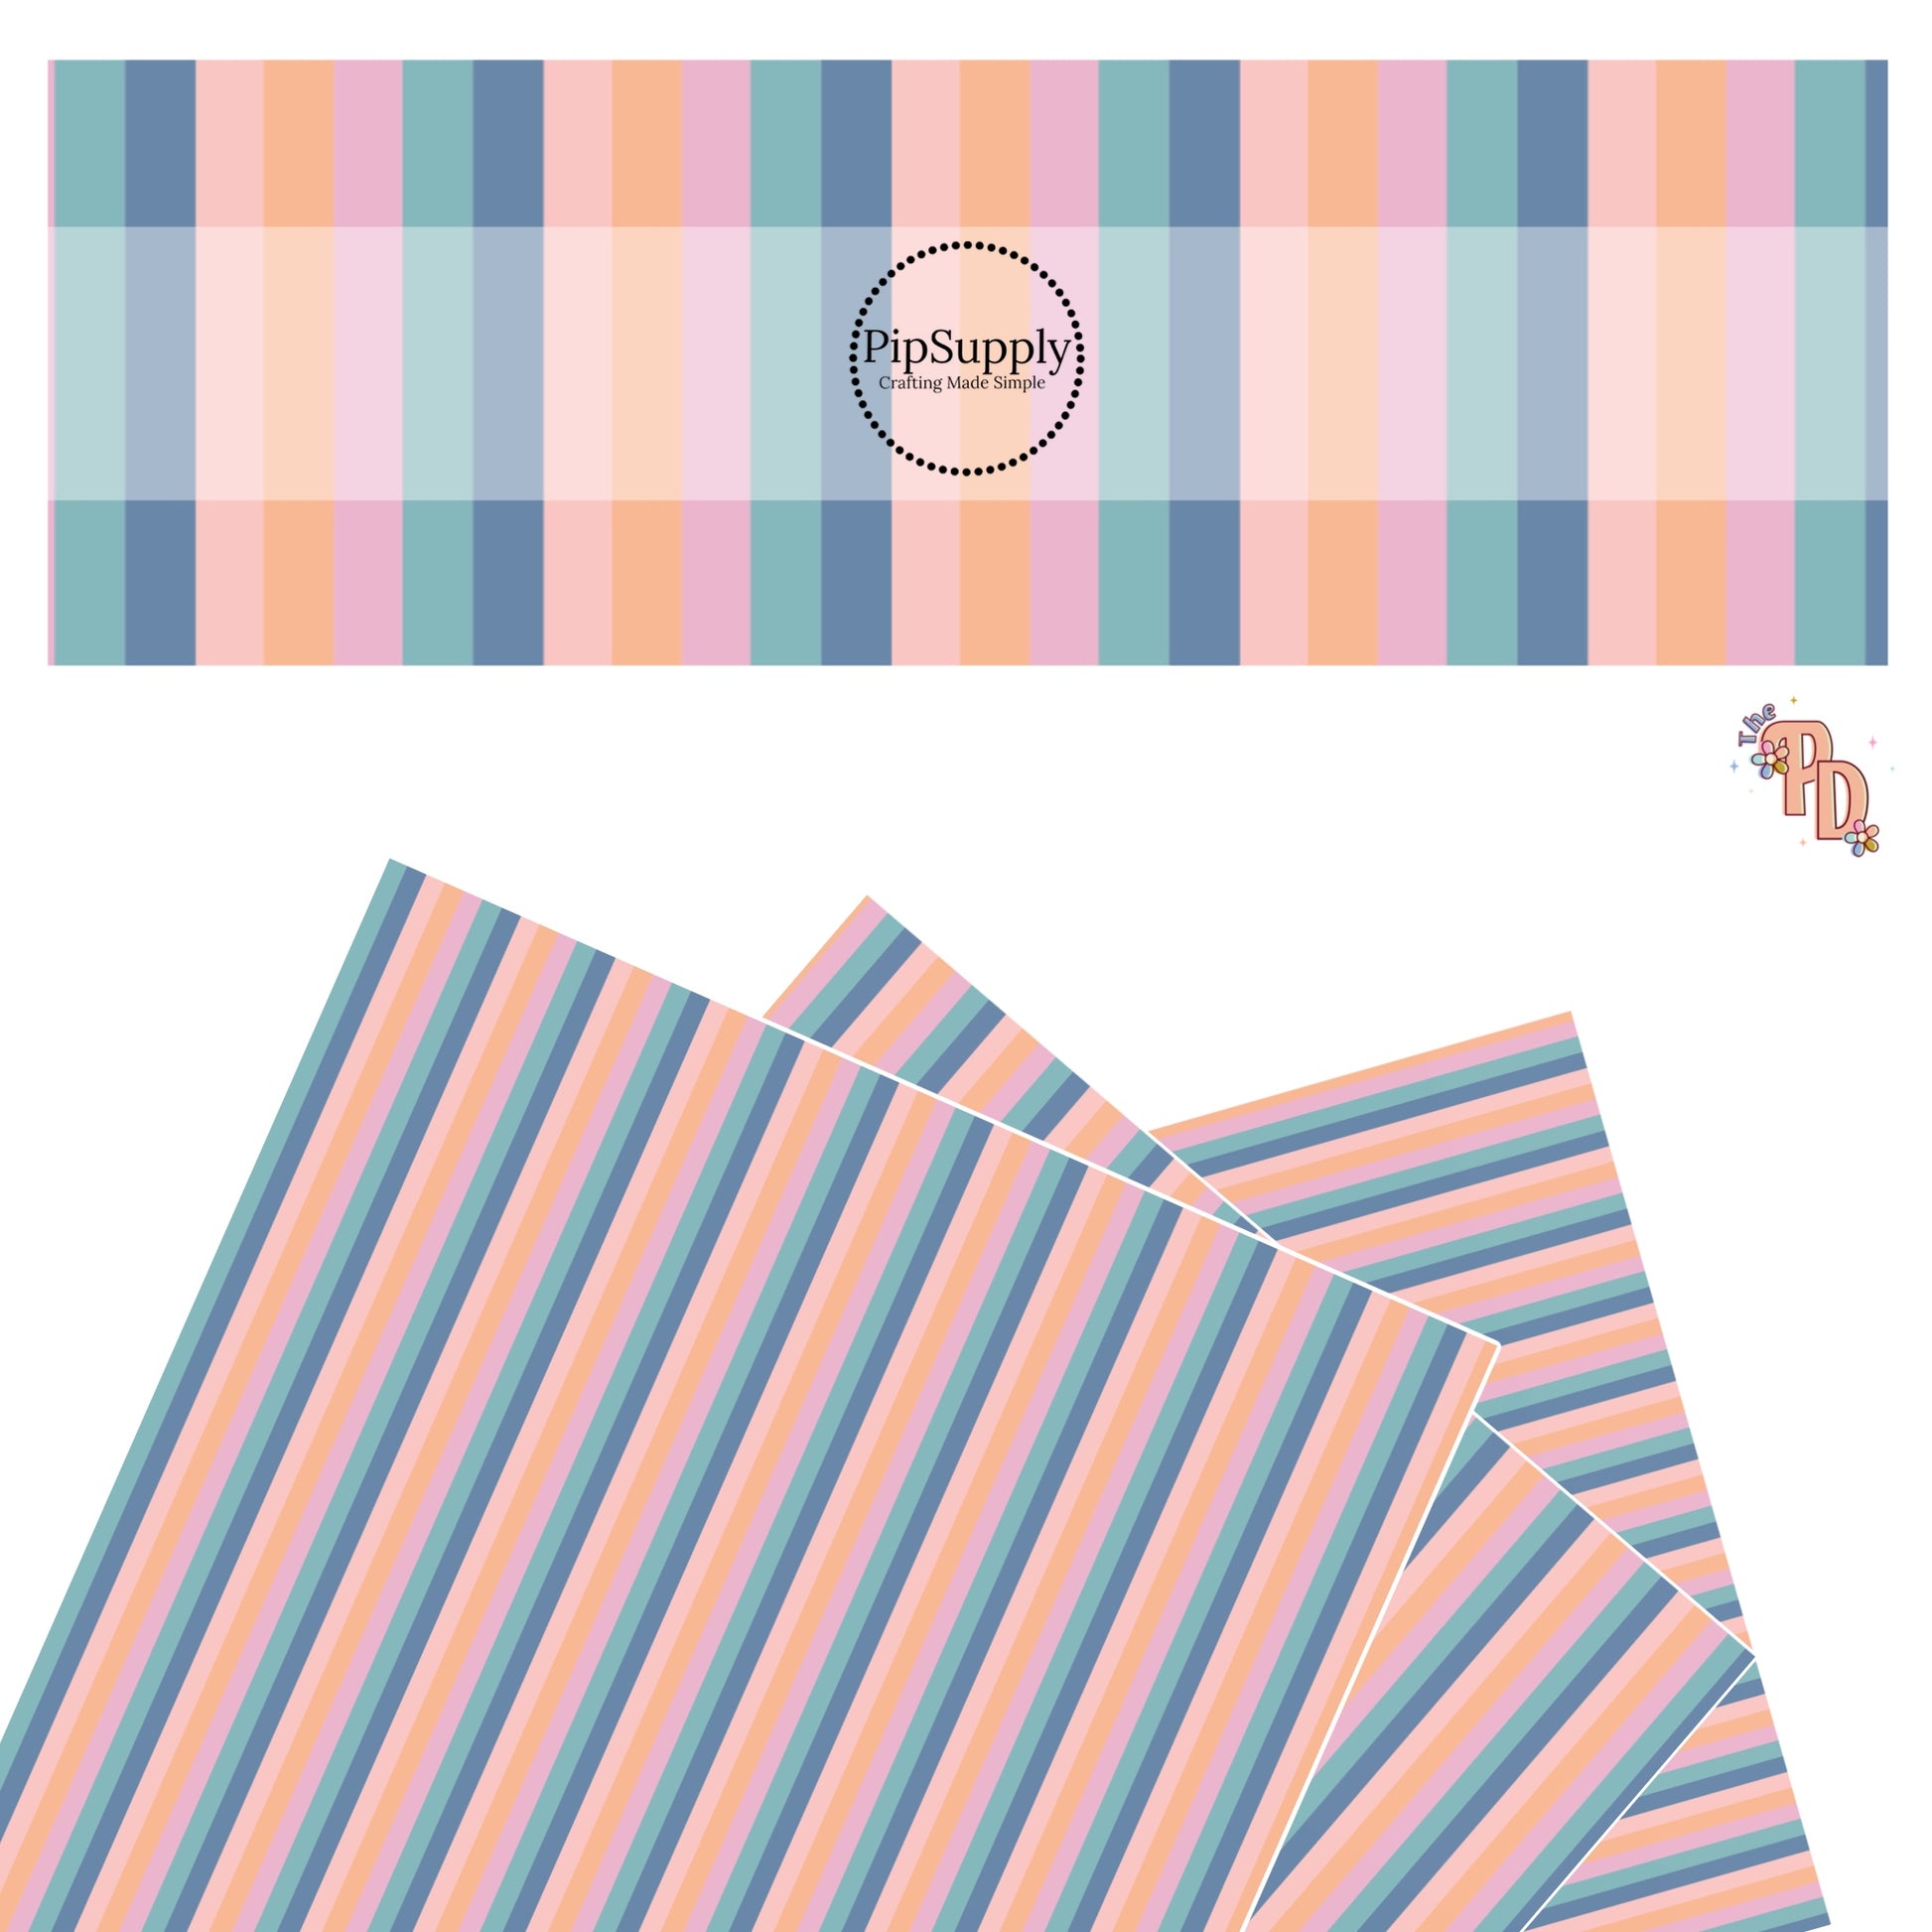 These spring pattern themed faux leather sheets contain the following design elements: pink, orange, and blue stripes. Our CPSIA compliant faux leather sheets or rolls can be used for all types of crafting projects.